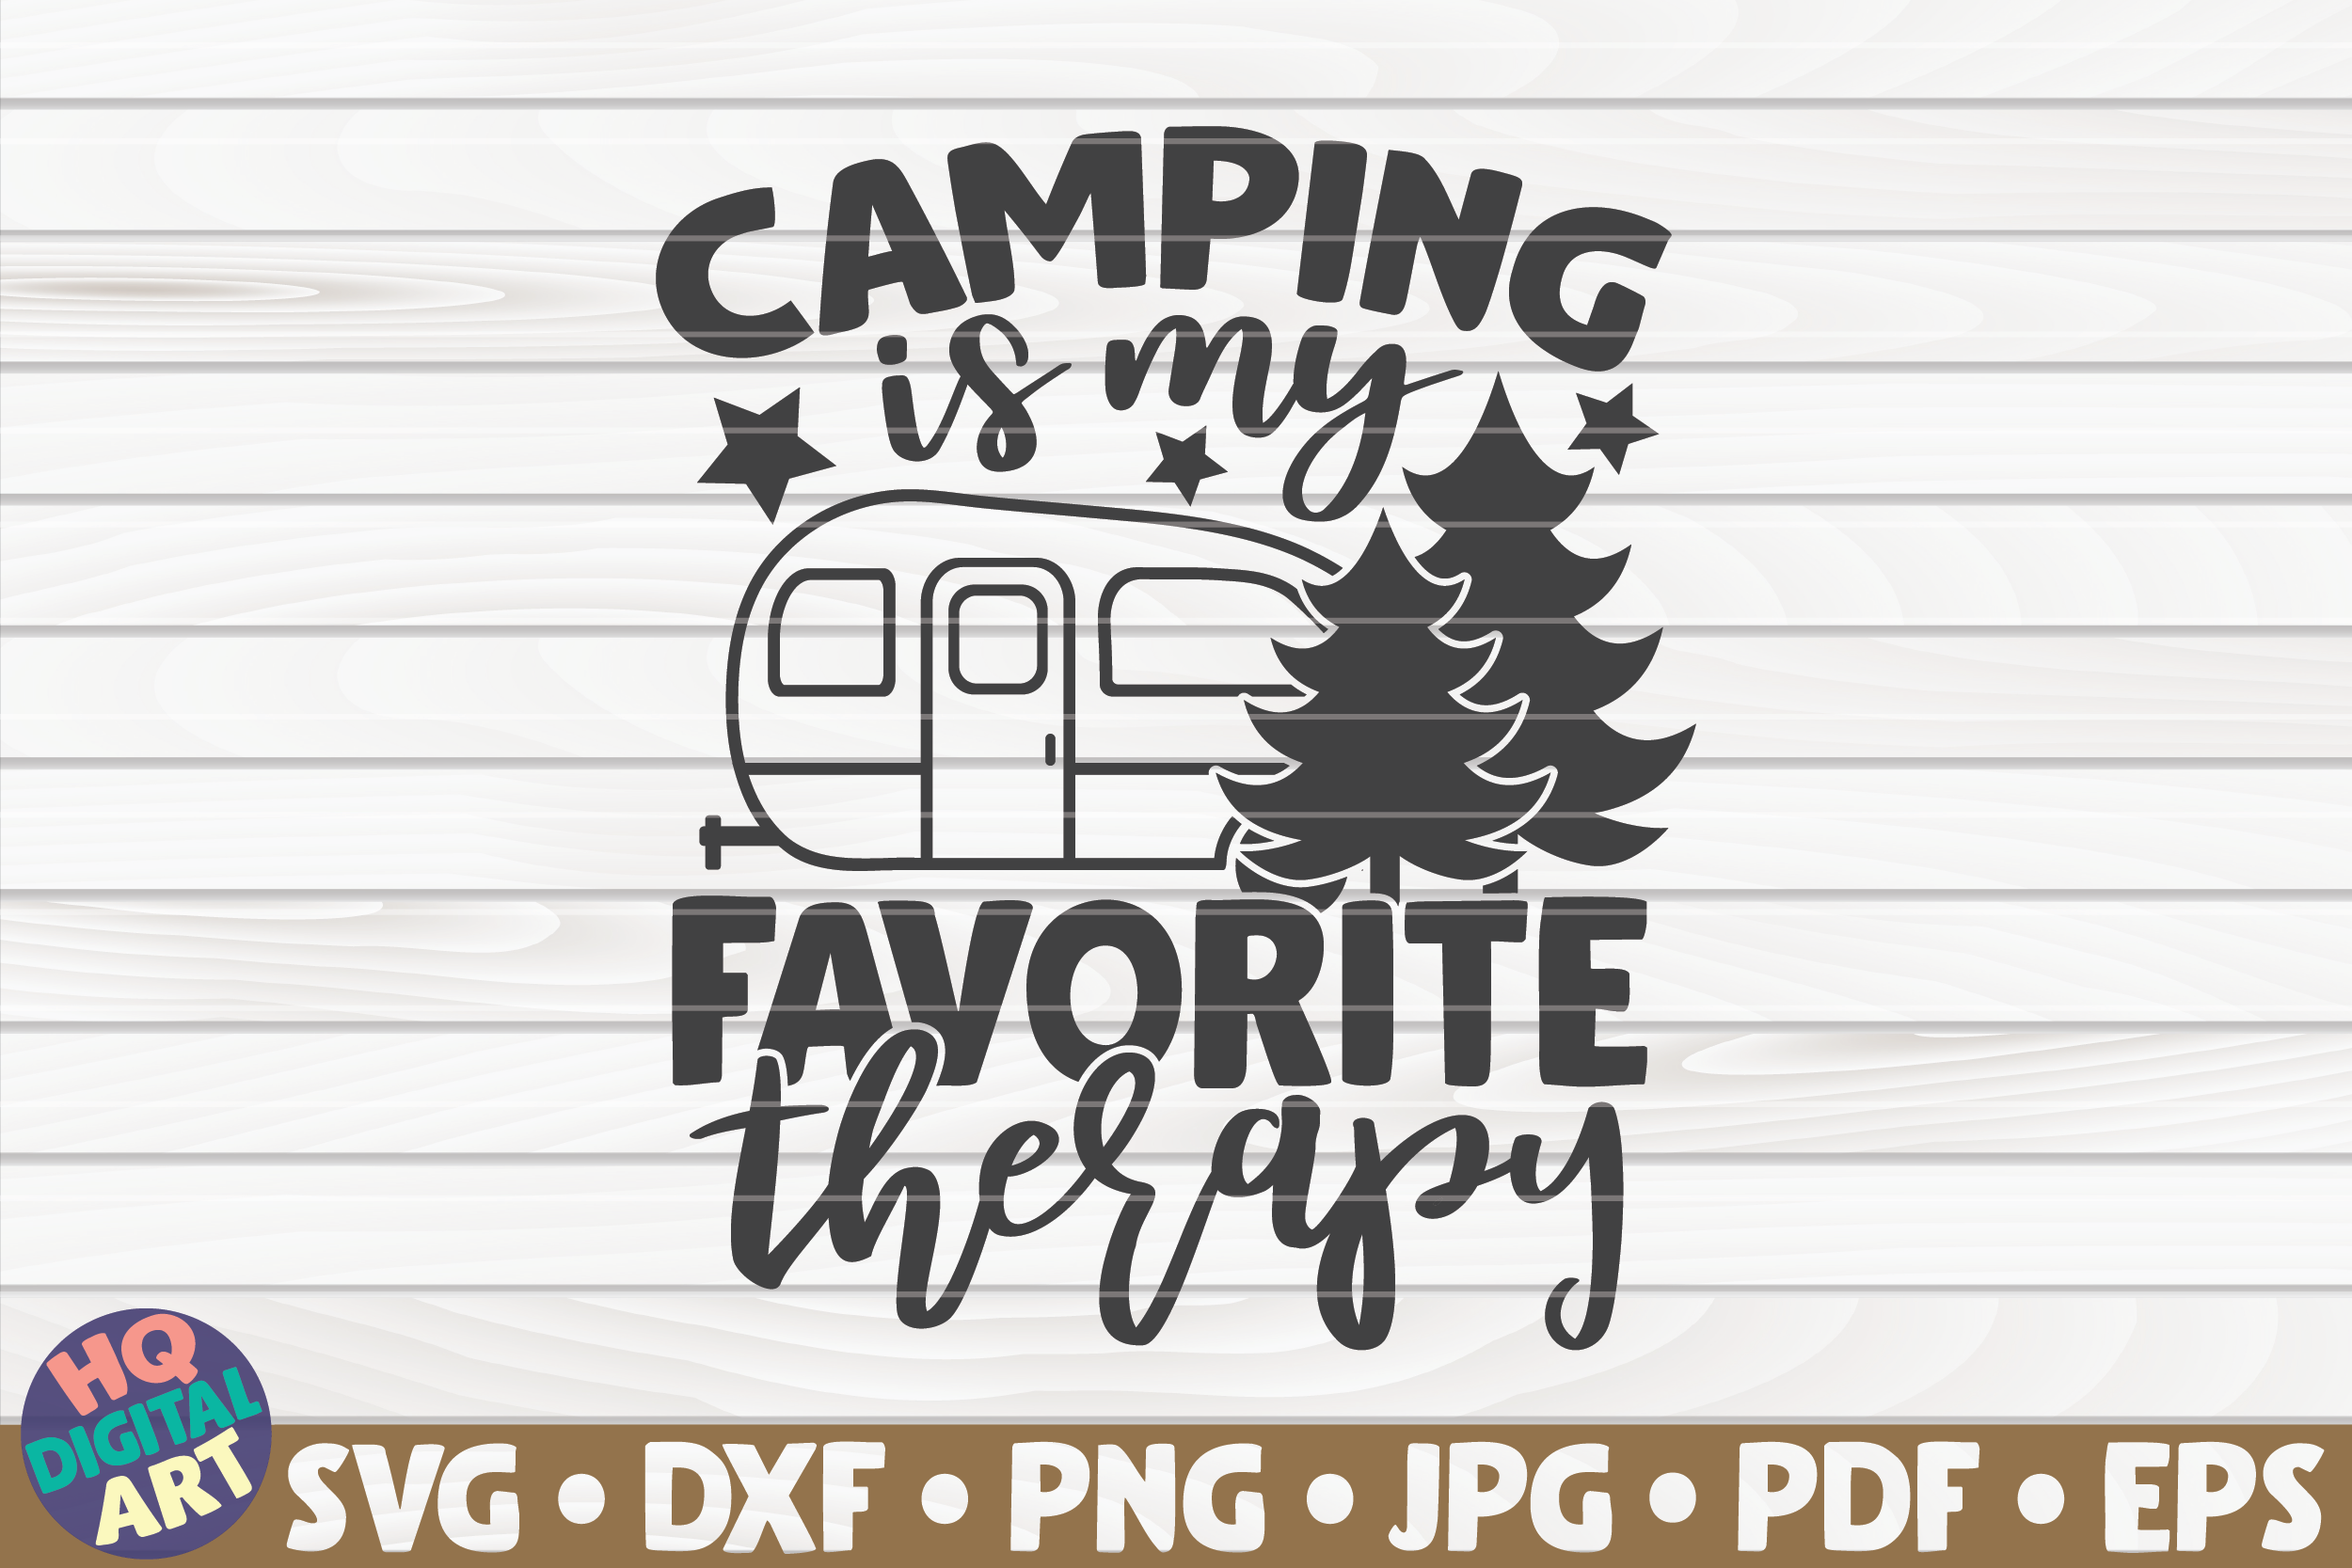 Download Camping Is My Favorite Therapy Svg Camping Quote By Hqdigitalart Thehungryjpeg Com